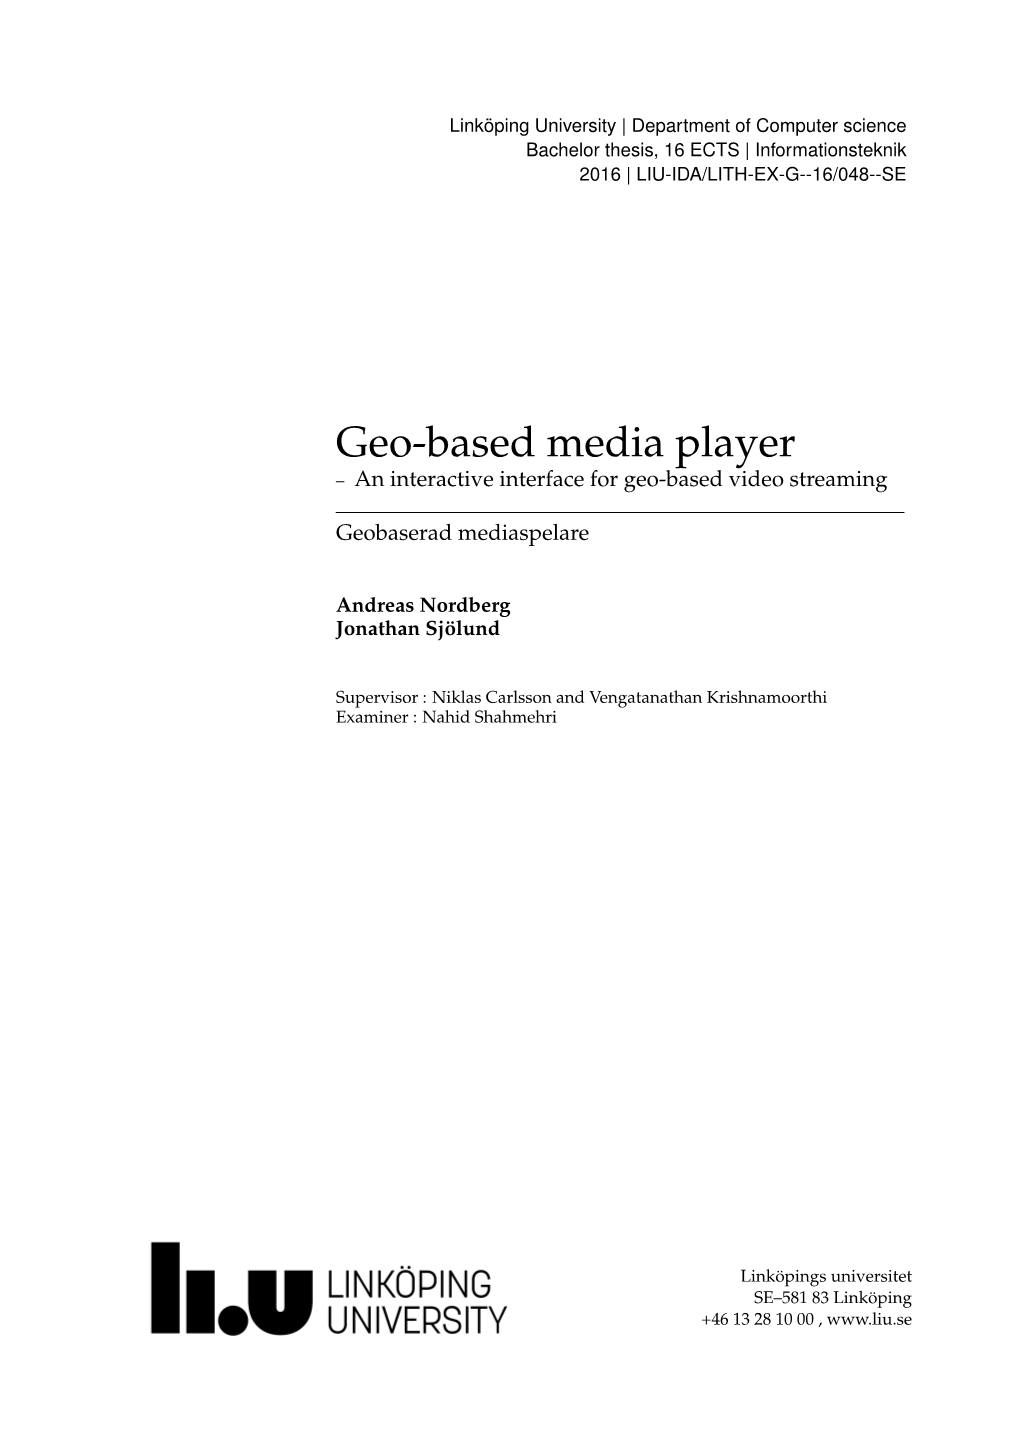 Geo-Based Media Player – an Interactive Interface for Geo-Based Video Streaming